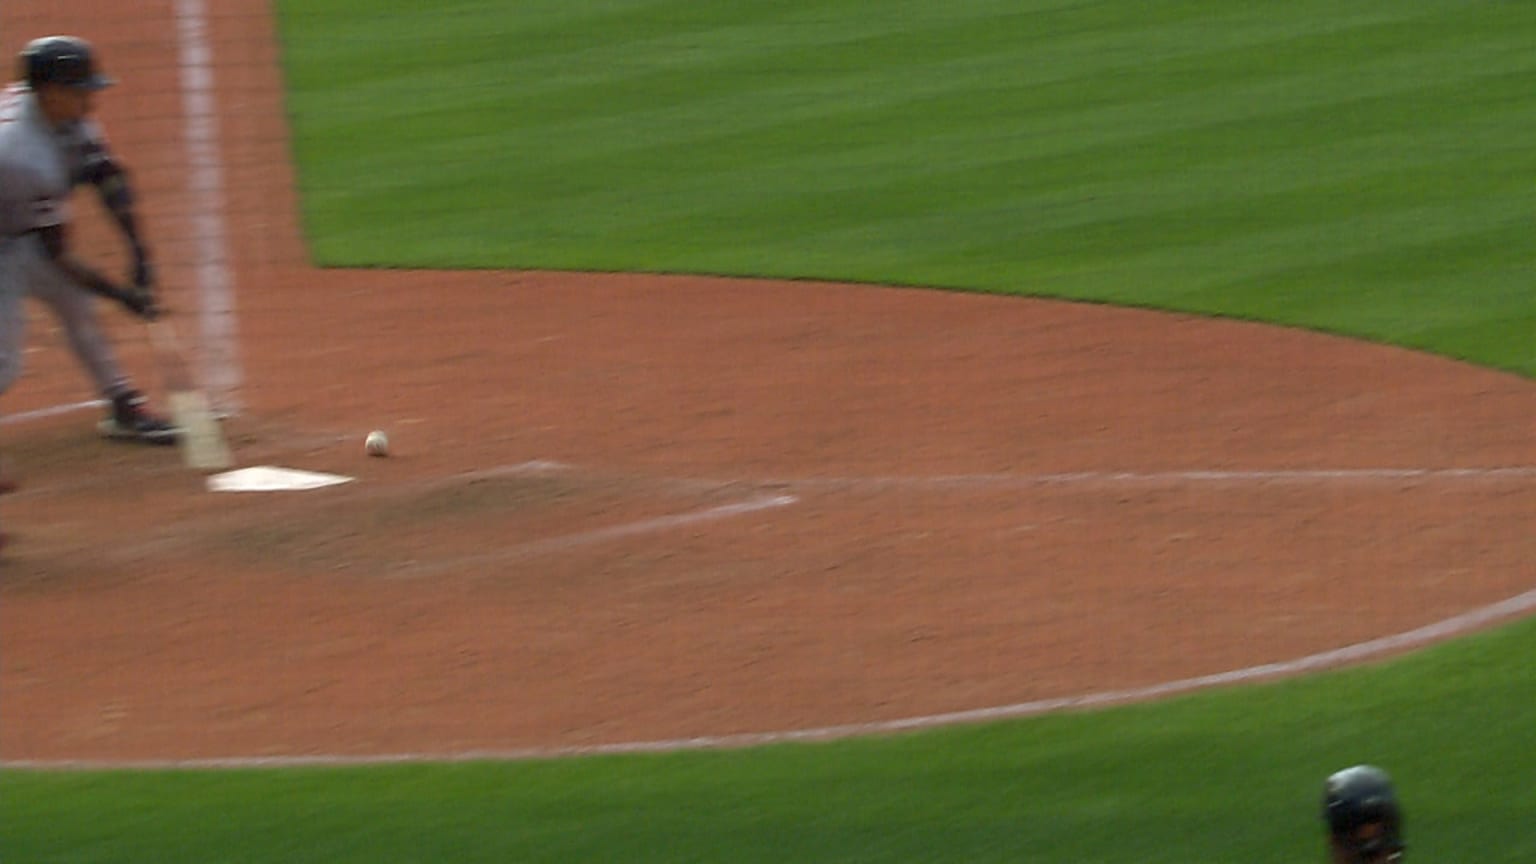 A screenshot of the baseball hitting the dirt in front of home plate, with the batter mid-swing